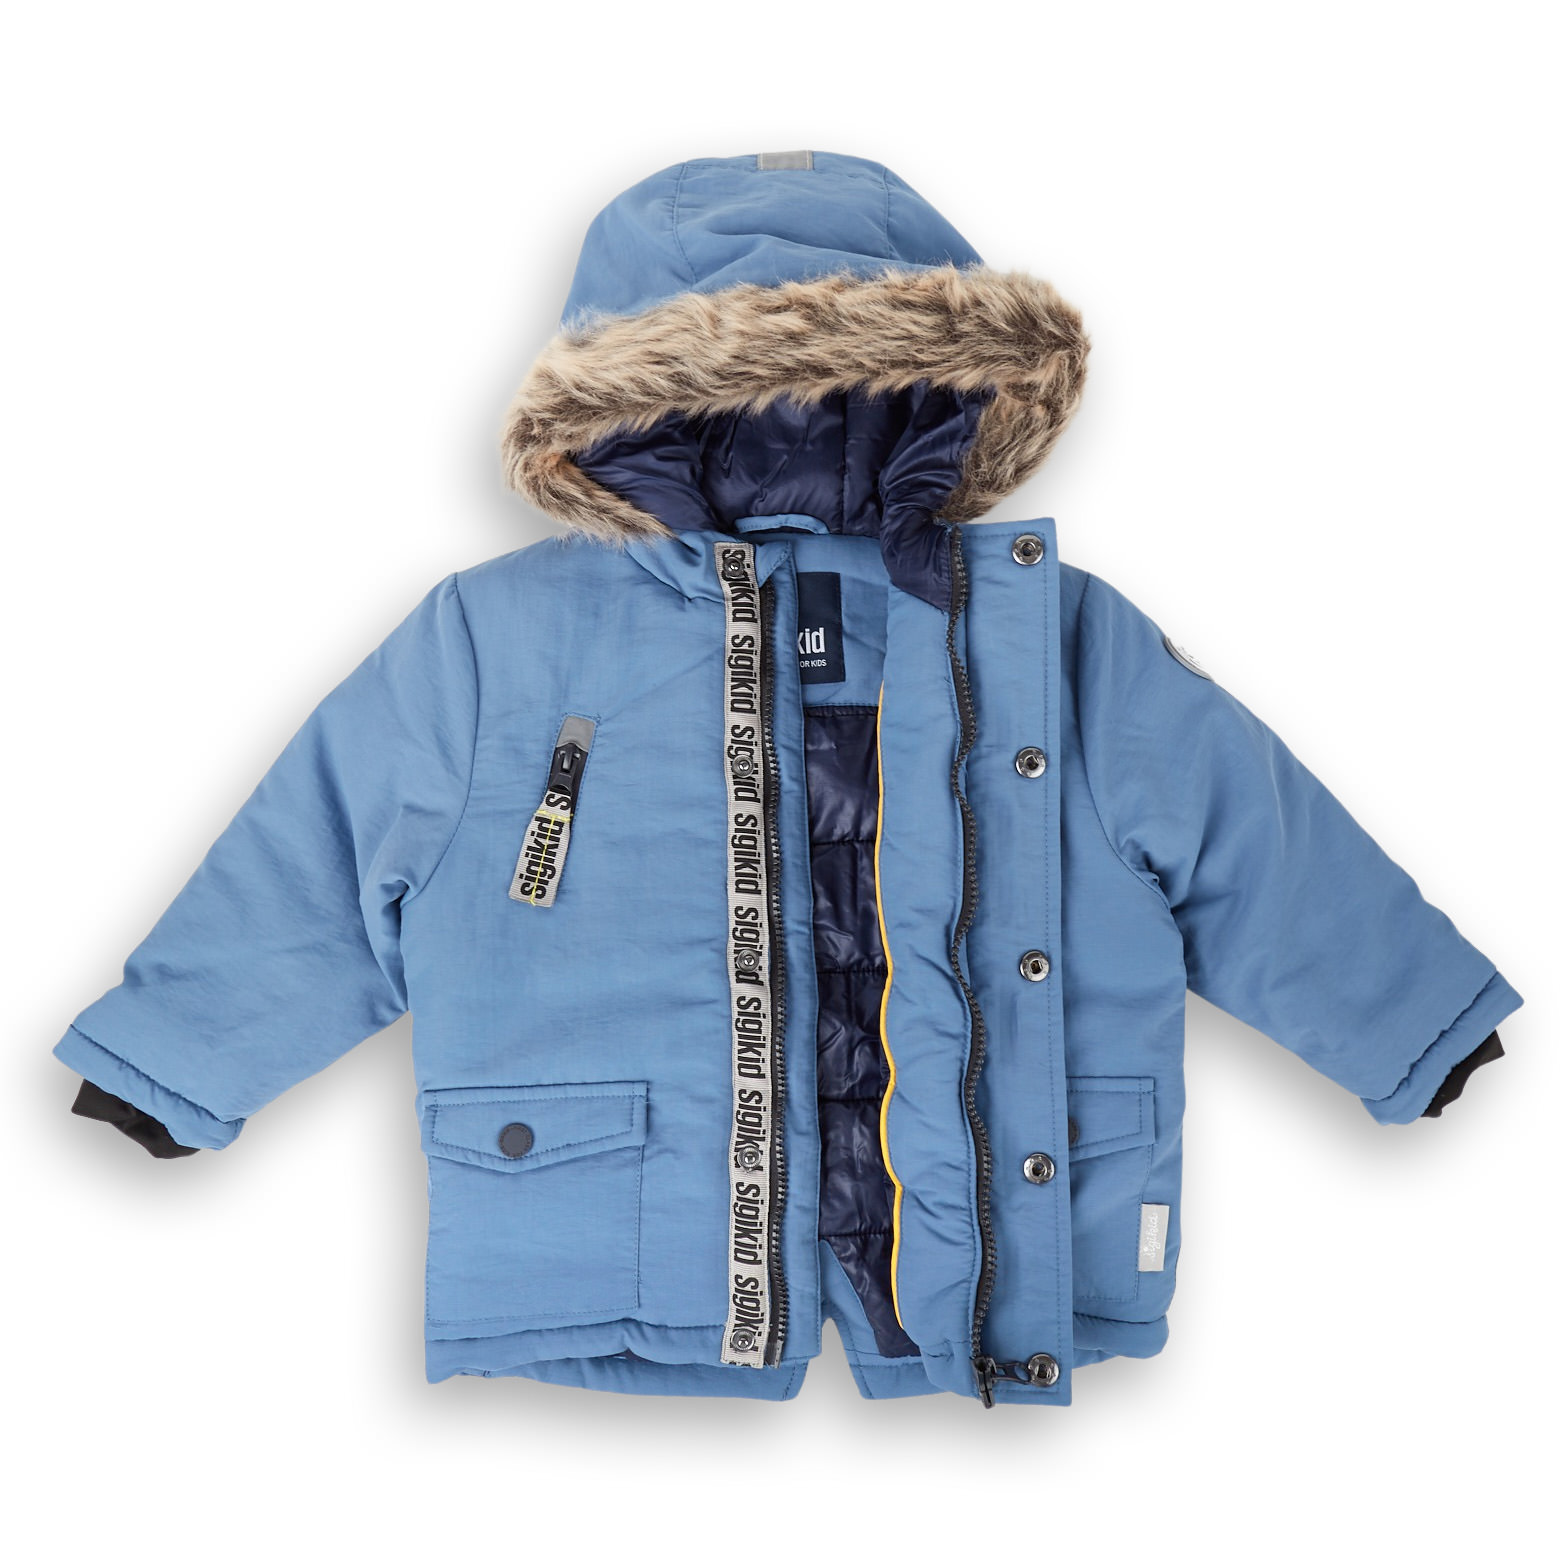 Insulated hooded winter jacket, blue, for babies and toddlers